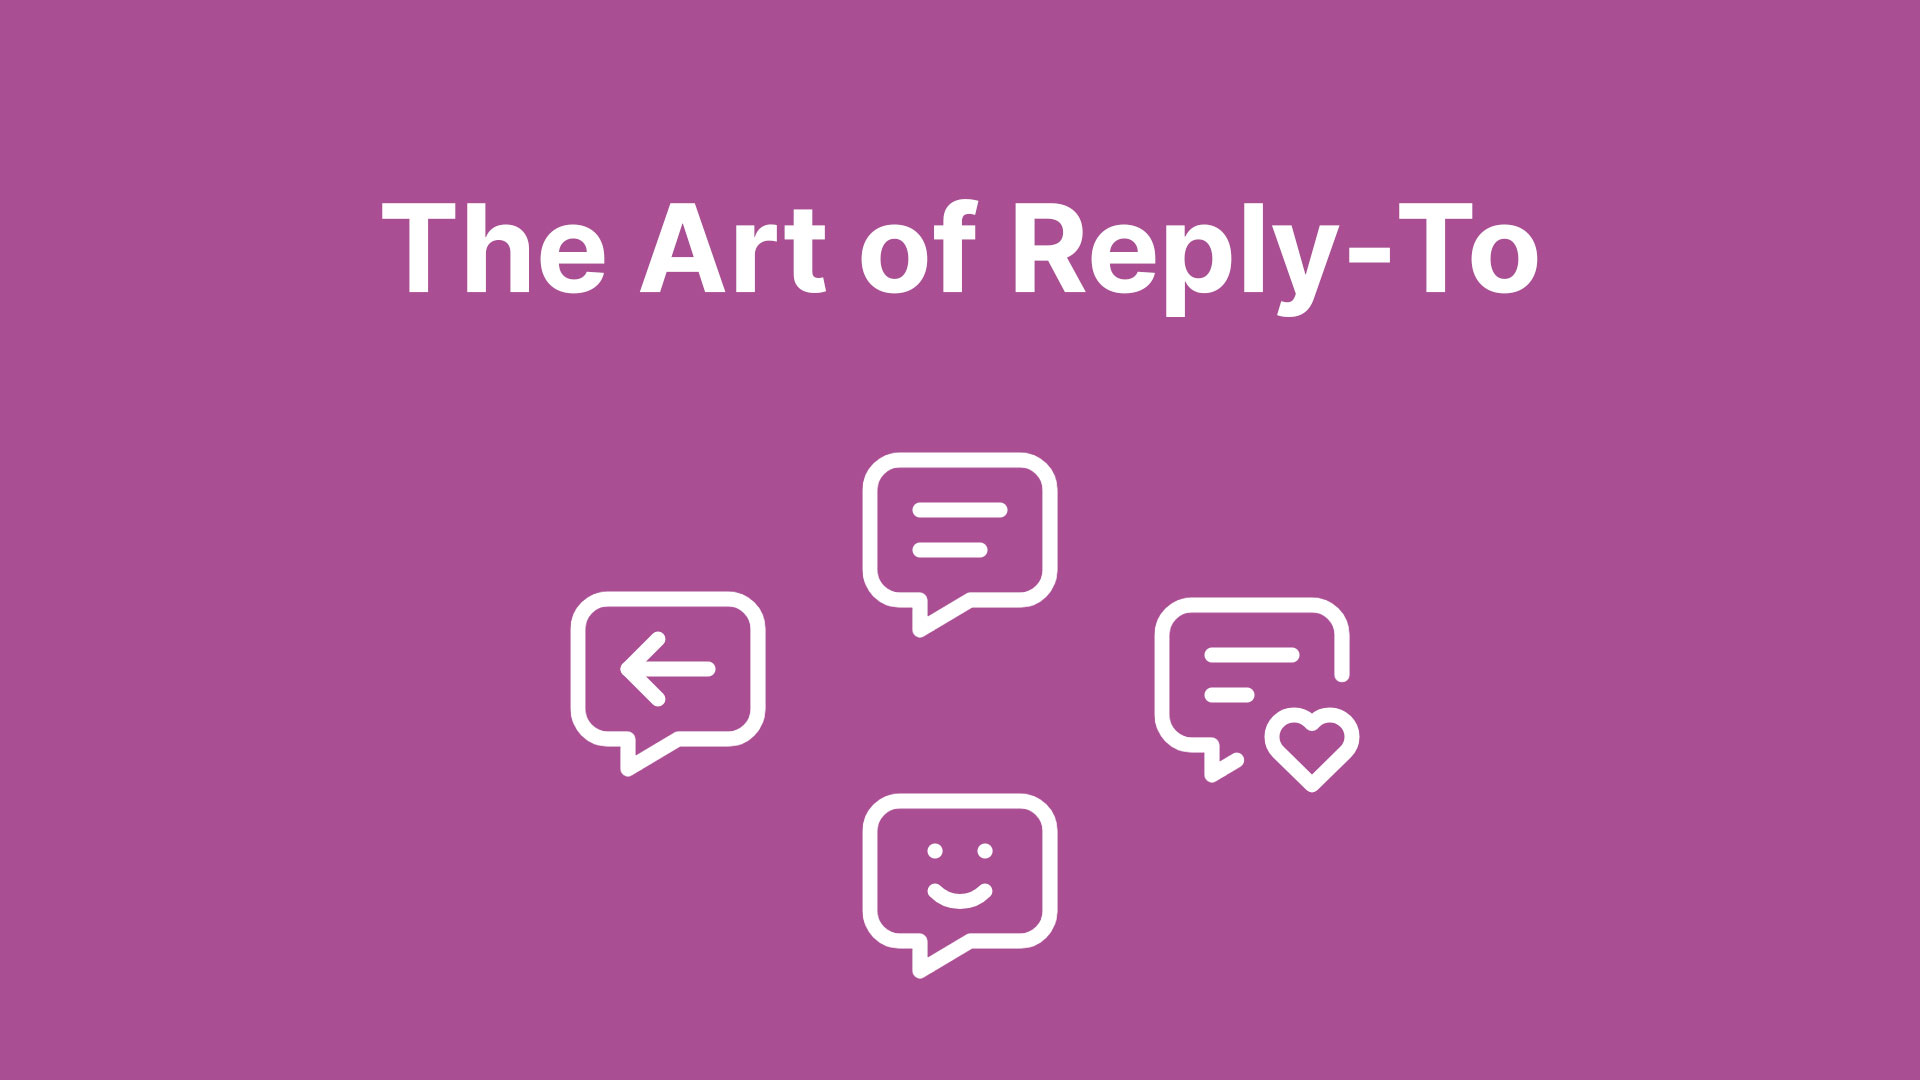 The Art of Reply-To